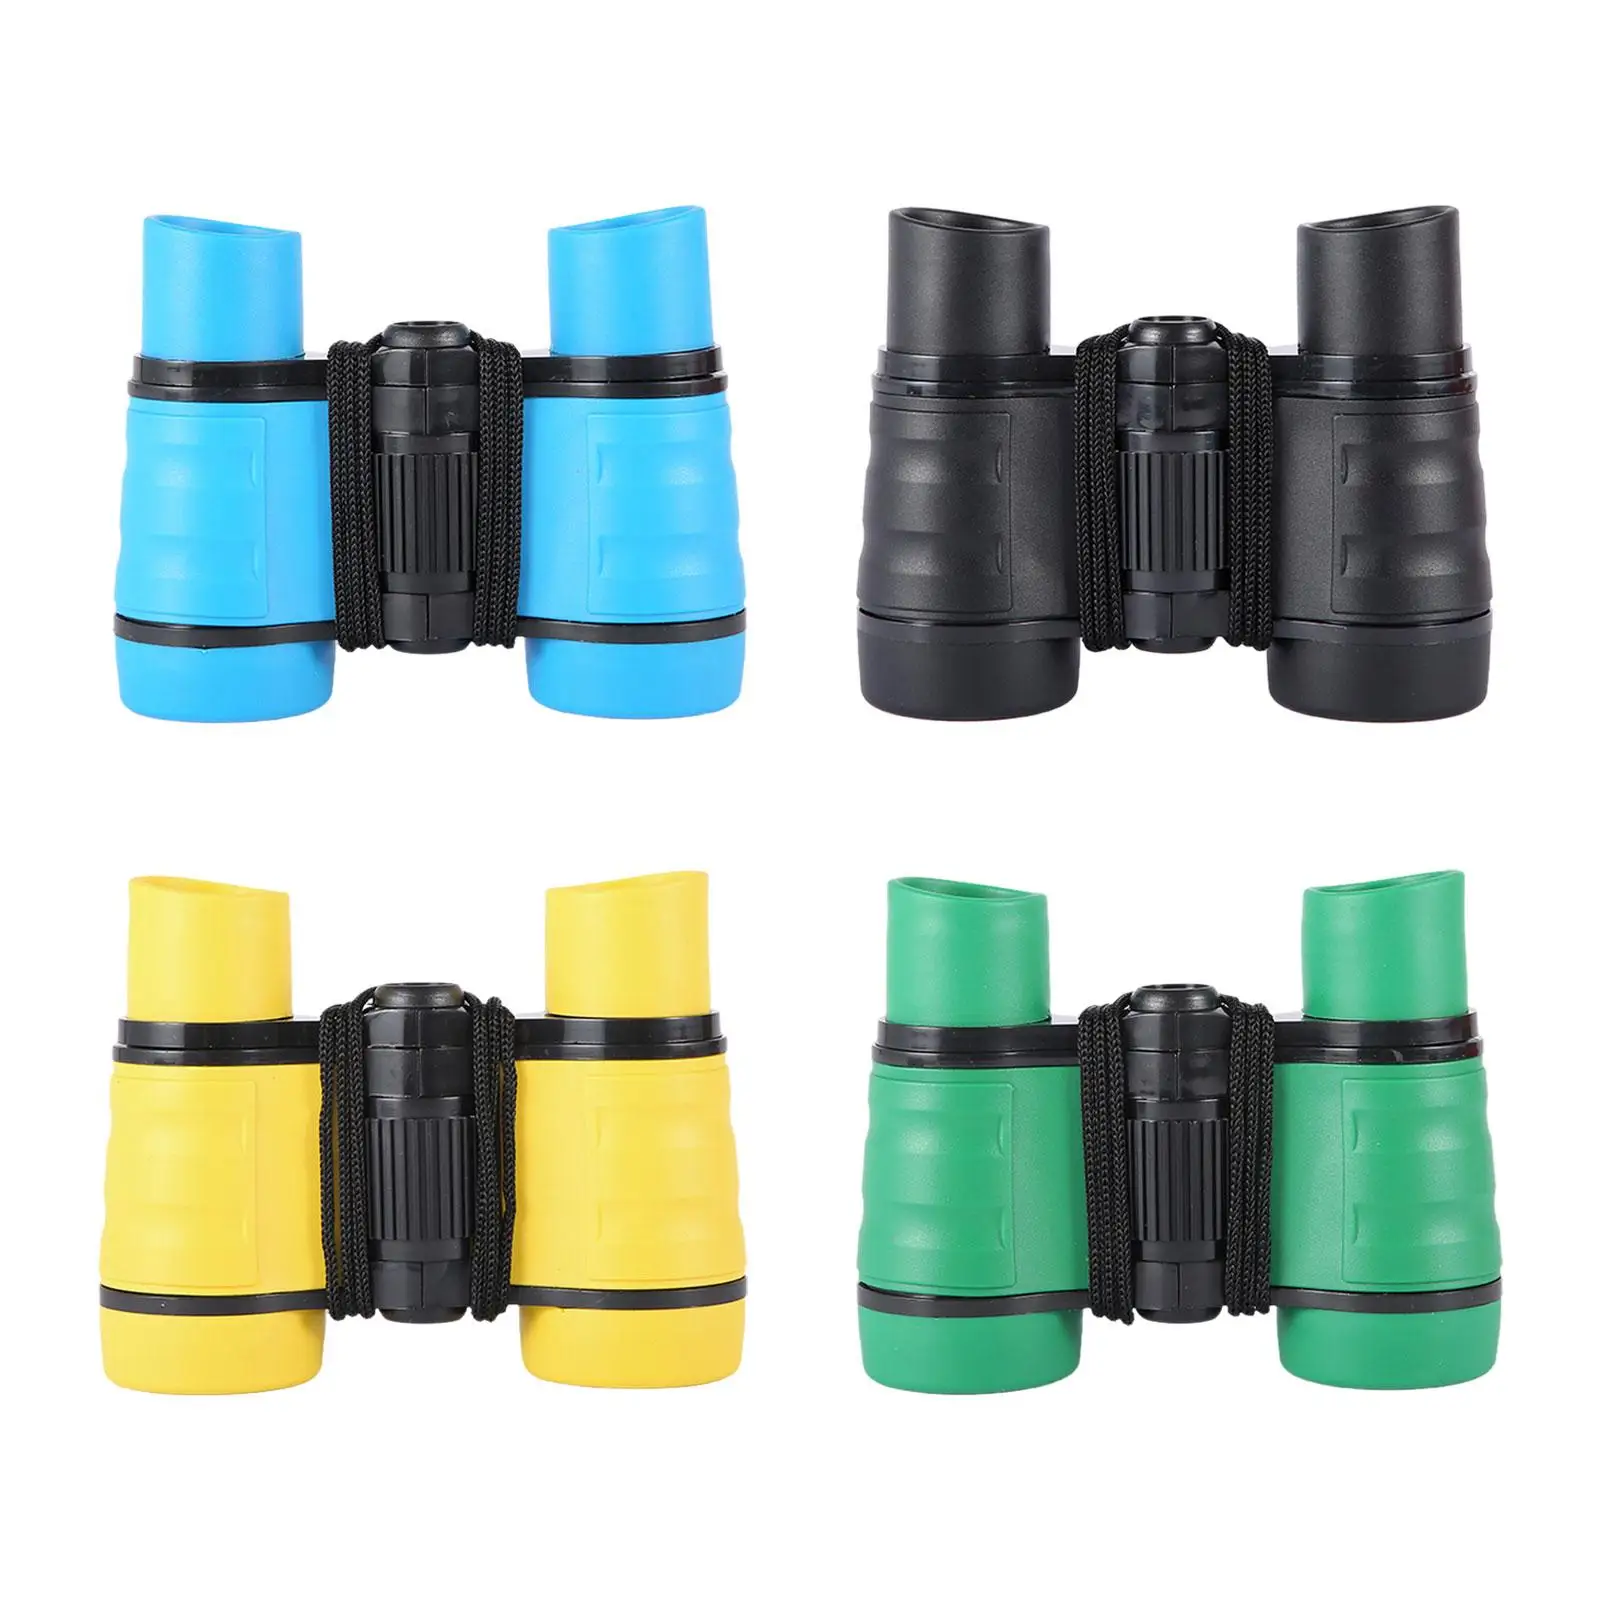 Kids Binoculars Toy 4x30 Bird Watching Telescope Jungle Binoculars Toy for Hunting Camping Presents Science Party Favors